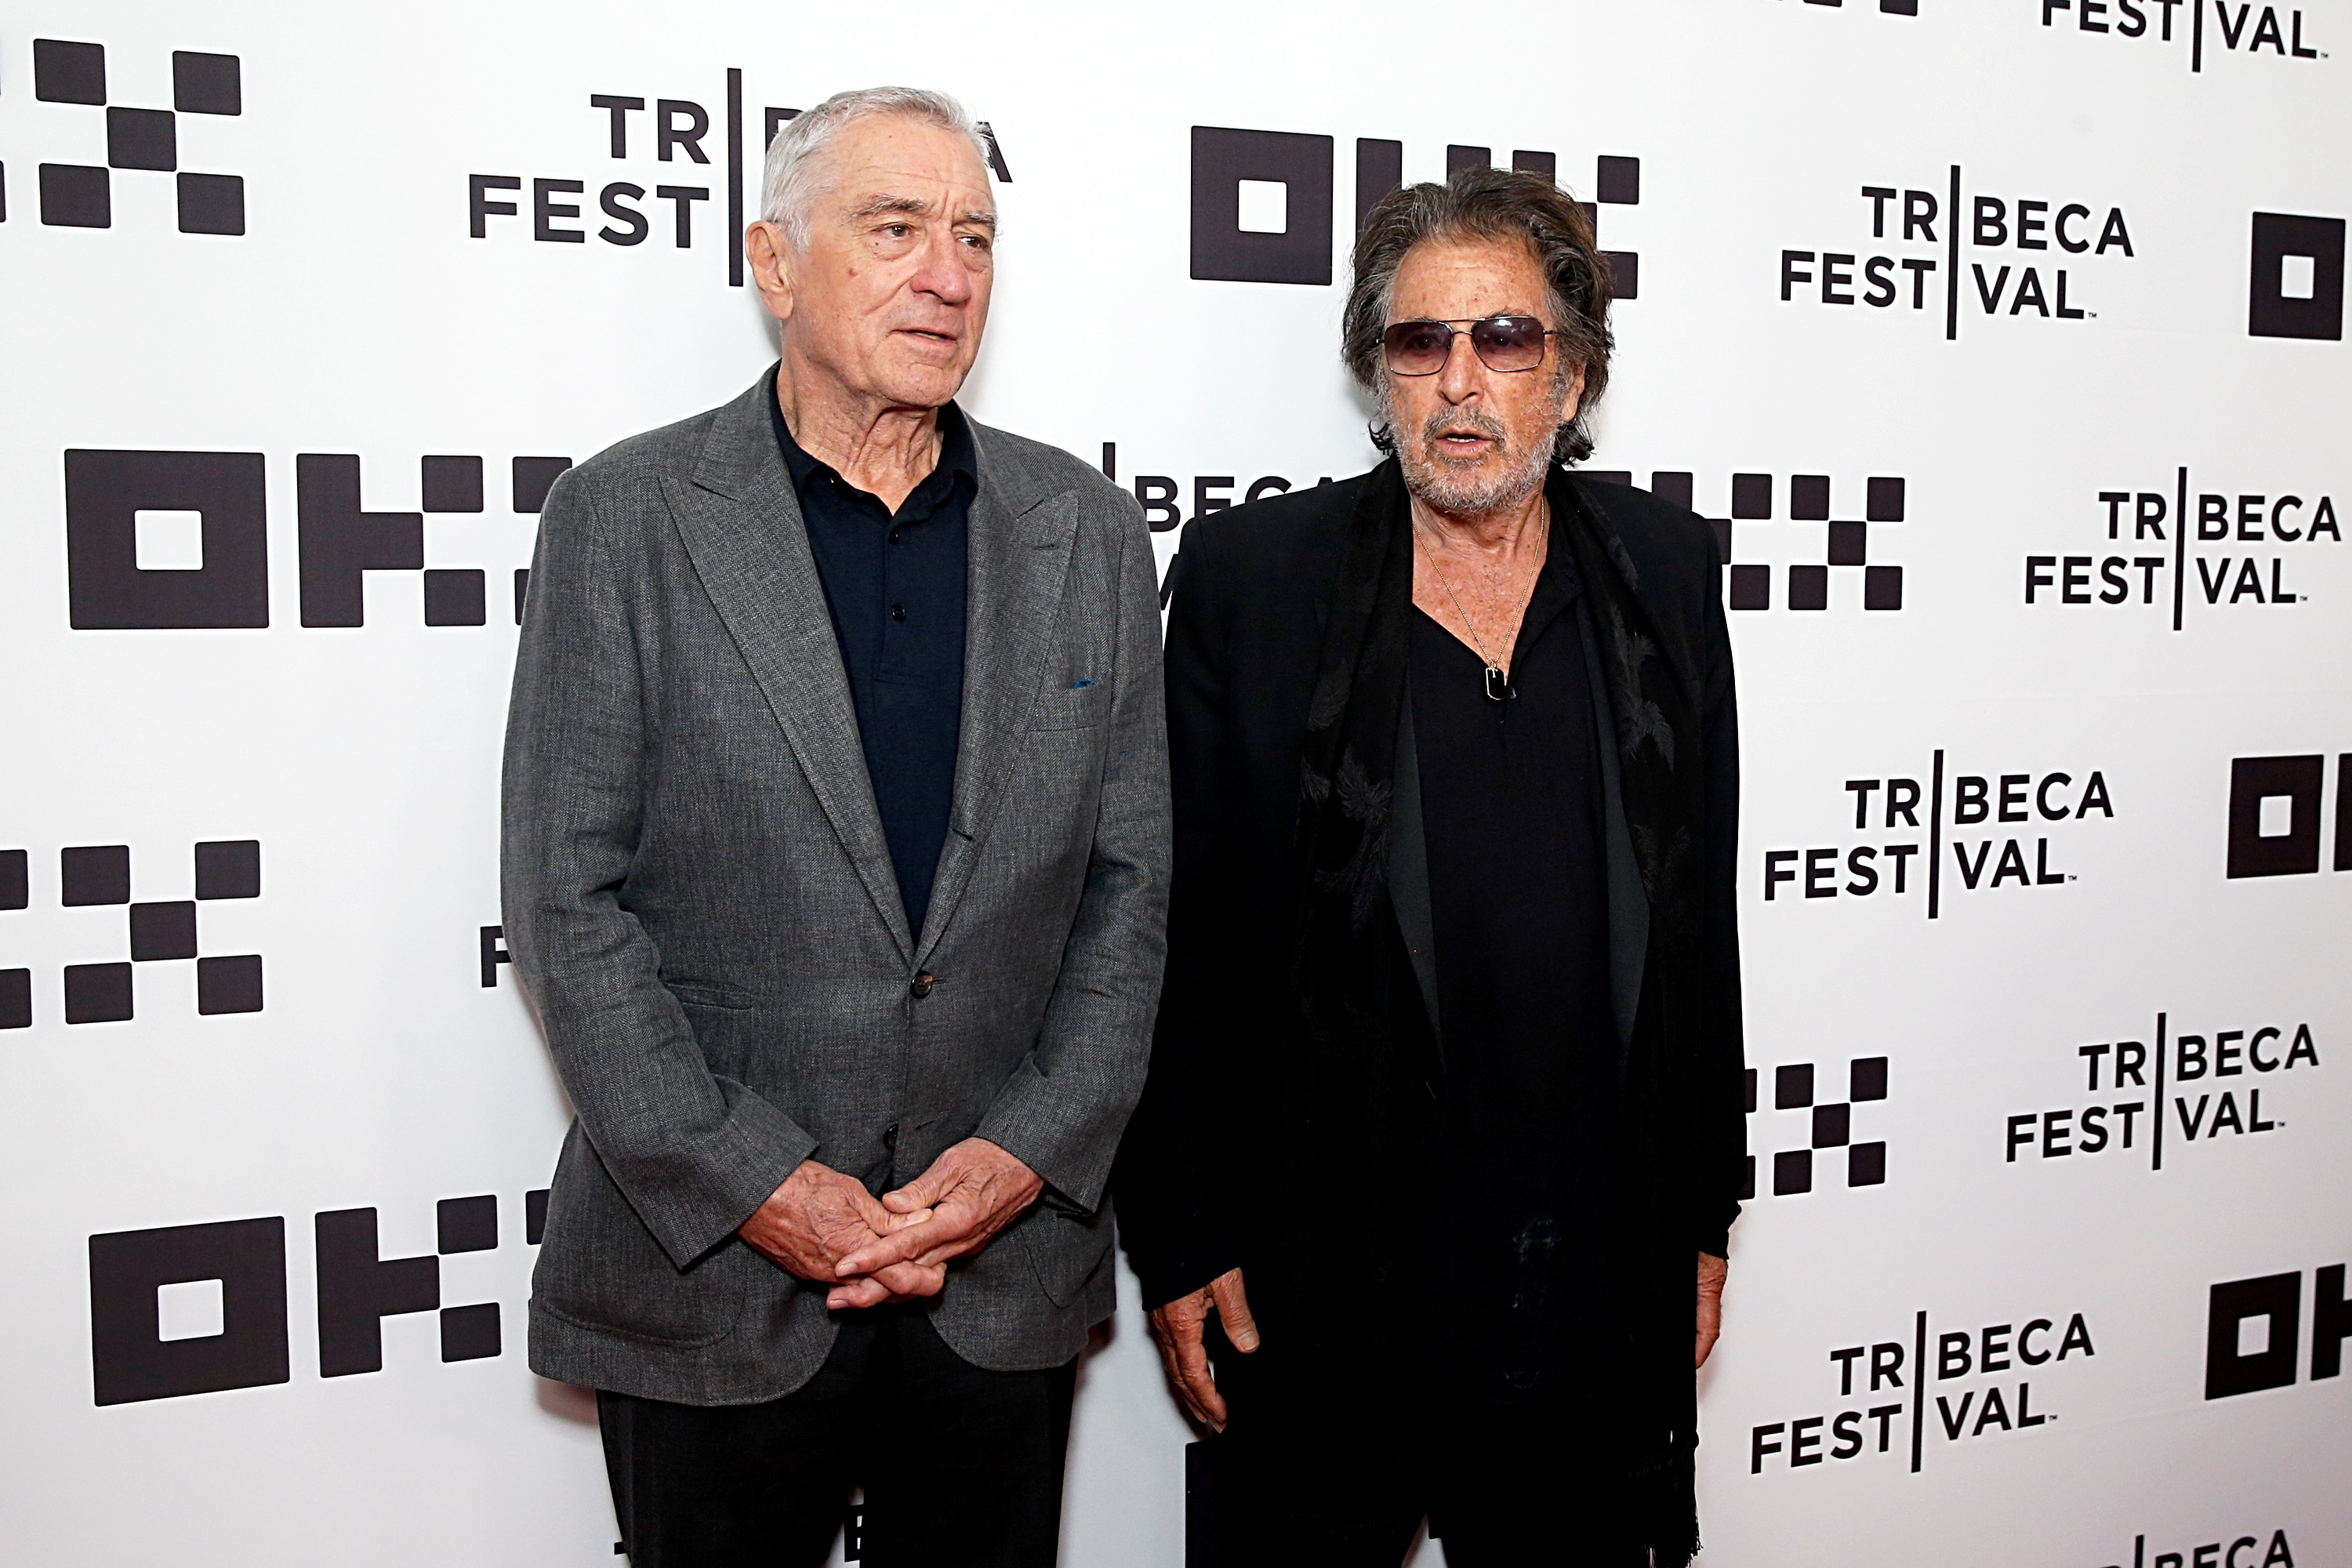 Robert De Niro and Al Pacino at the premiere of "Heat" during the 2022 Tribeca Festival on June 17, 2022, in New York | Source: Getty Images